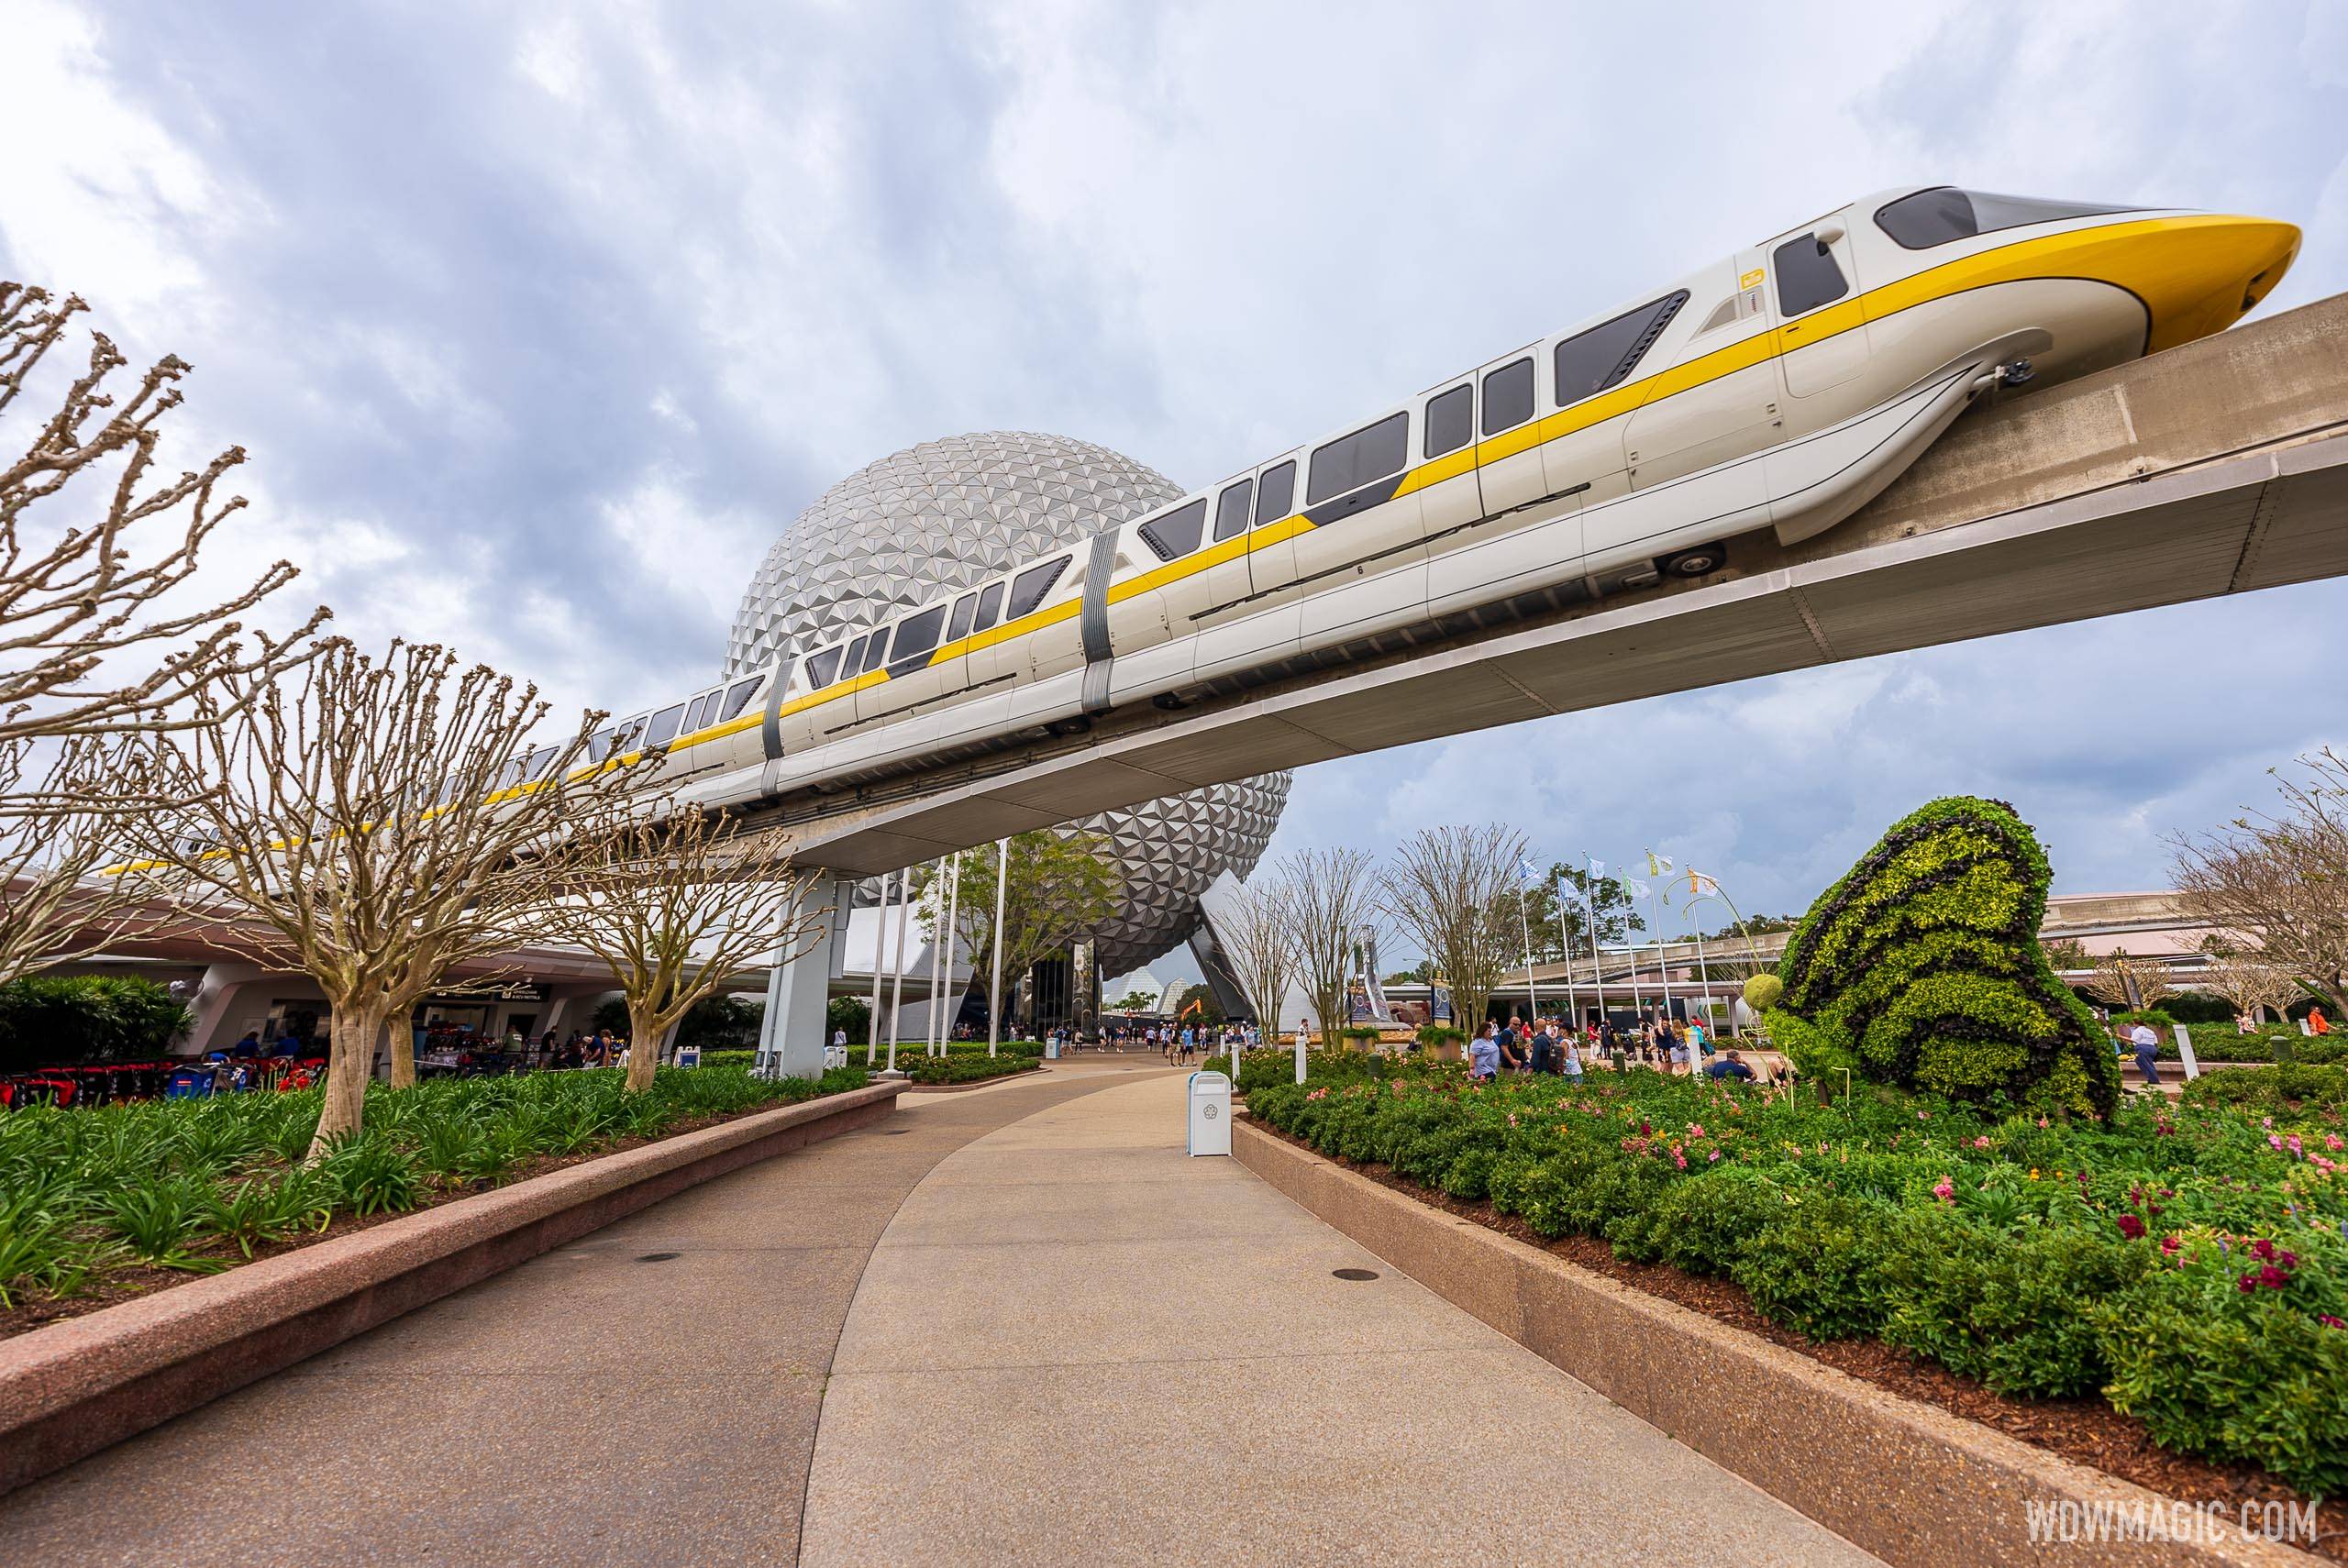 Refurbished Monorail Yellow on the EPCOT Beam at the main entrance